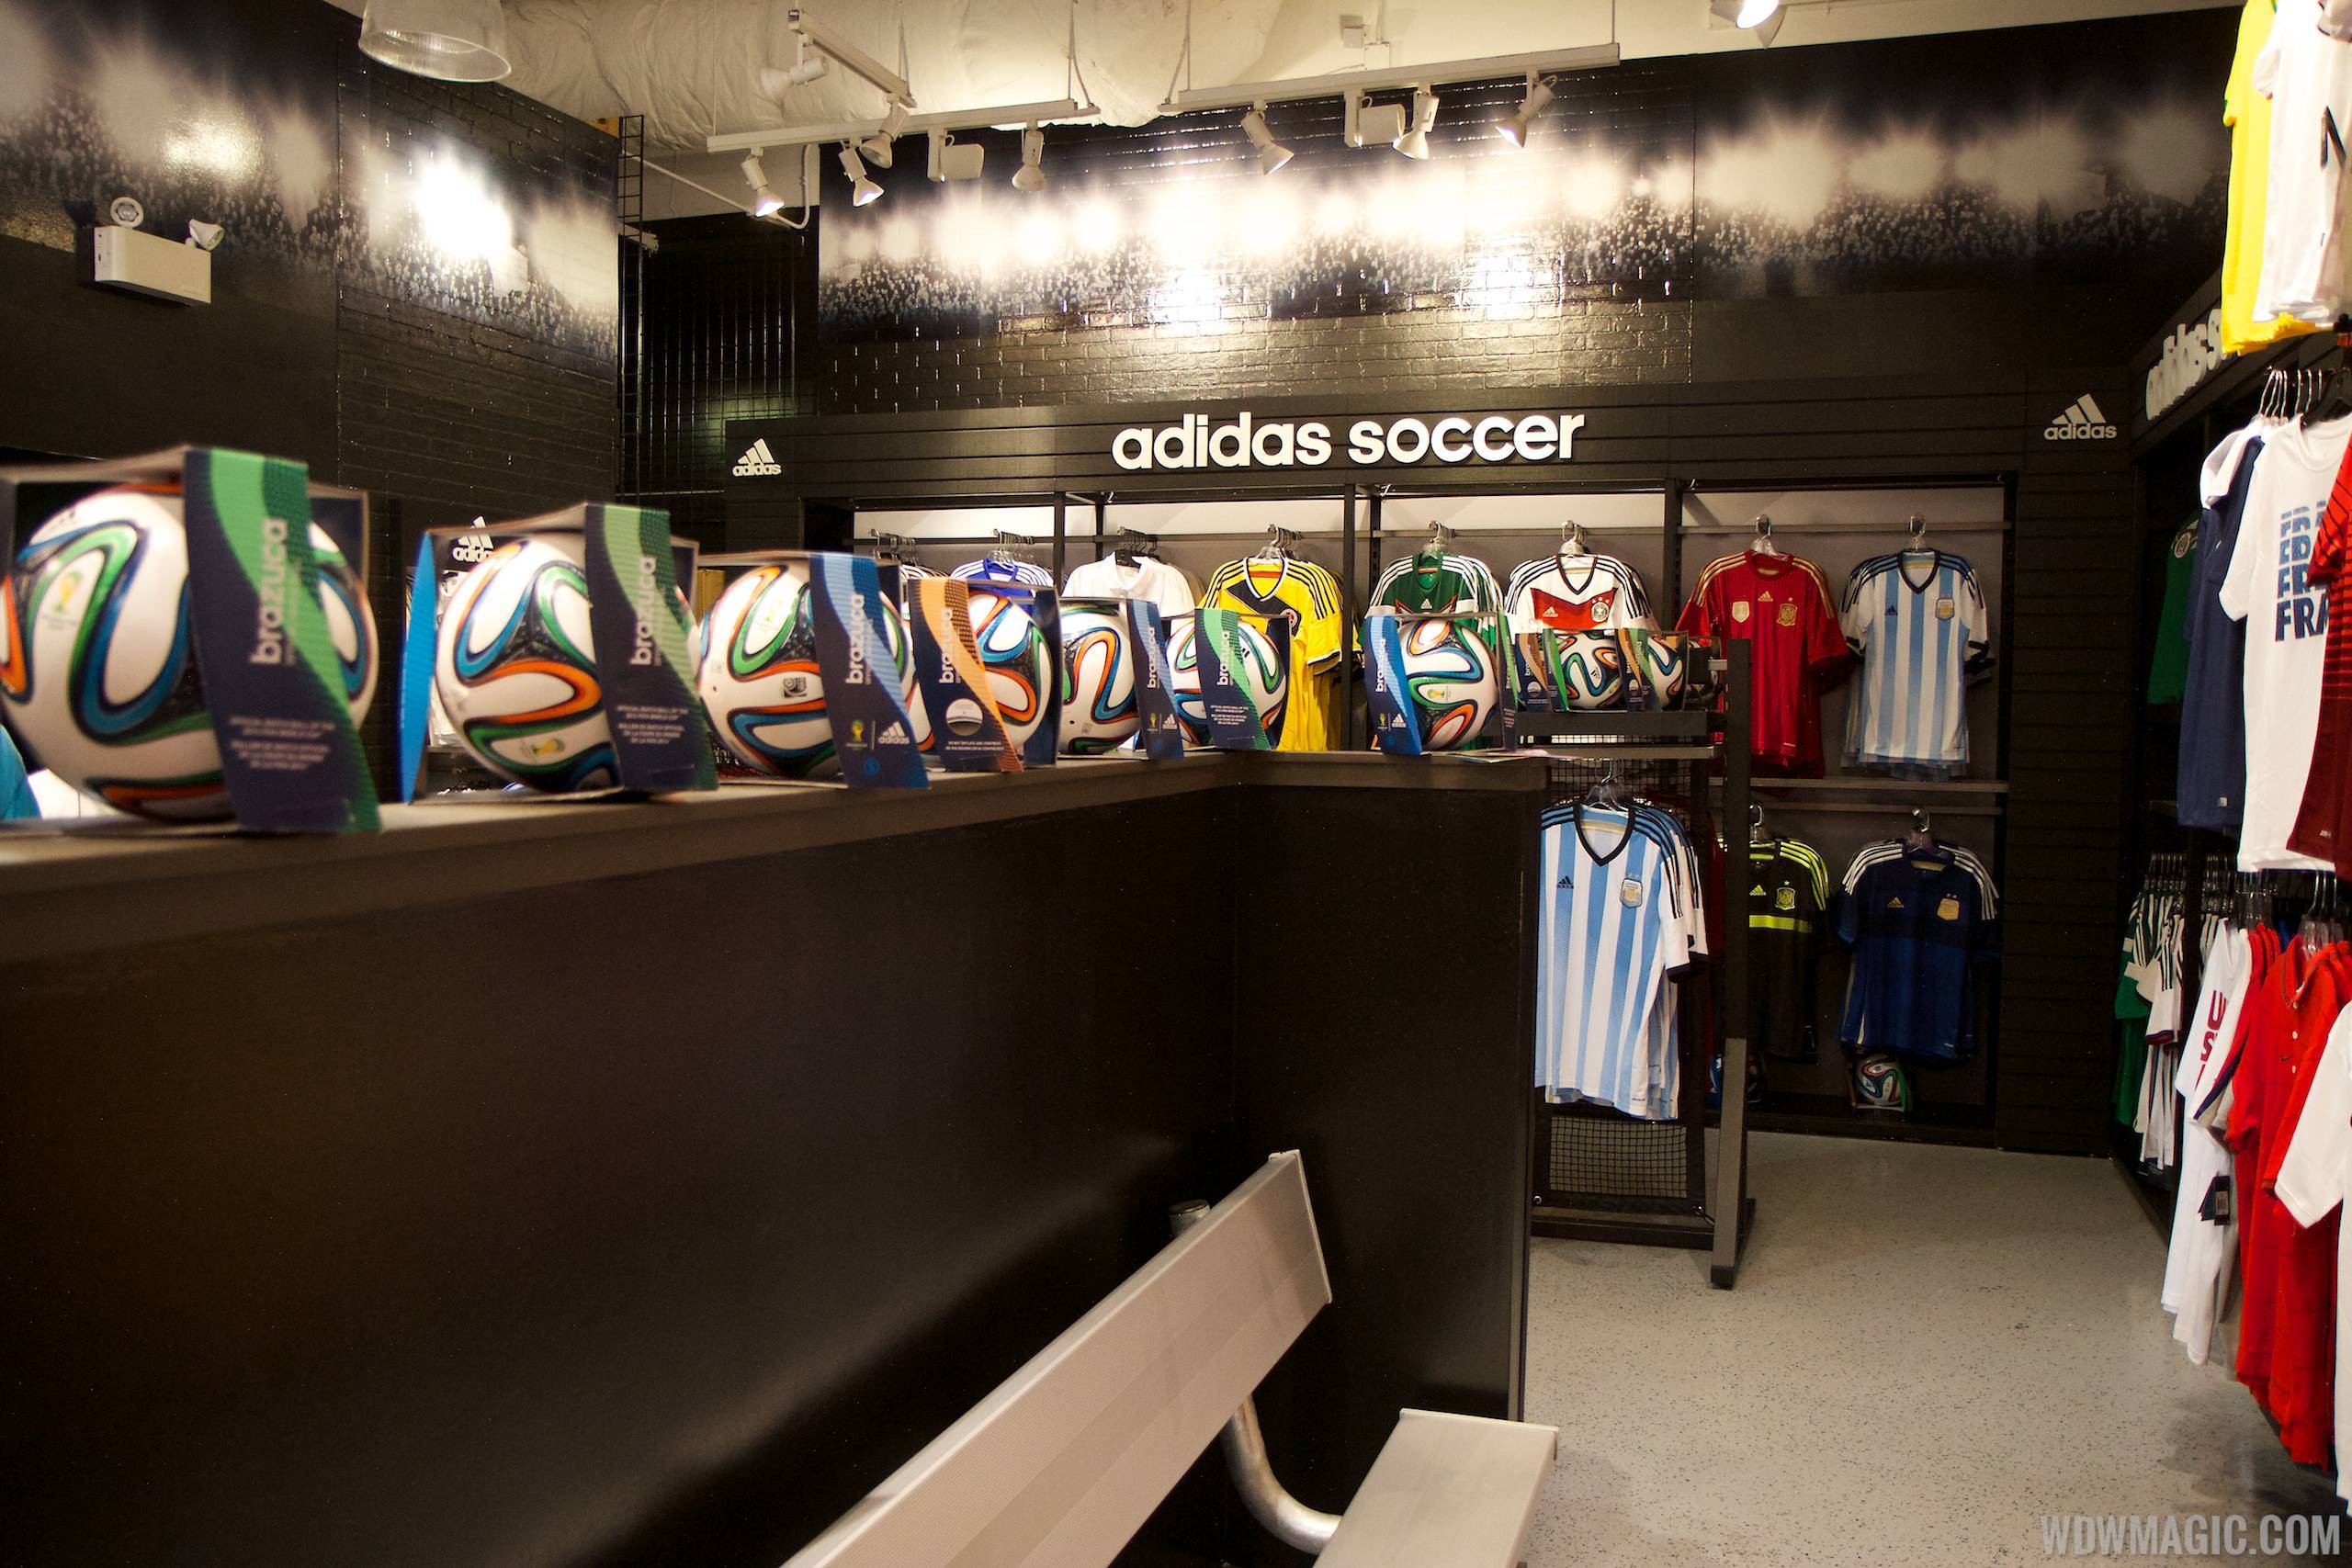 United World Soccer in its pop-up location in 2014